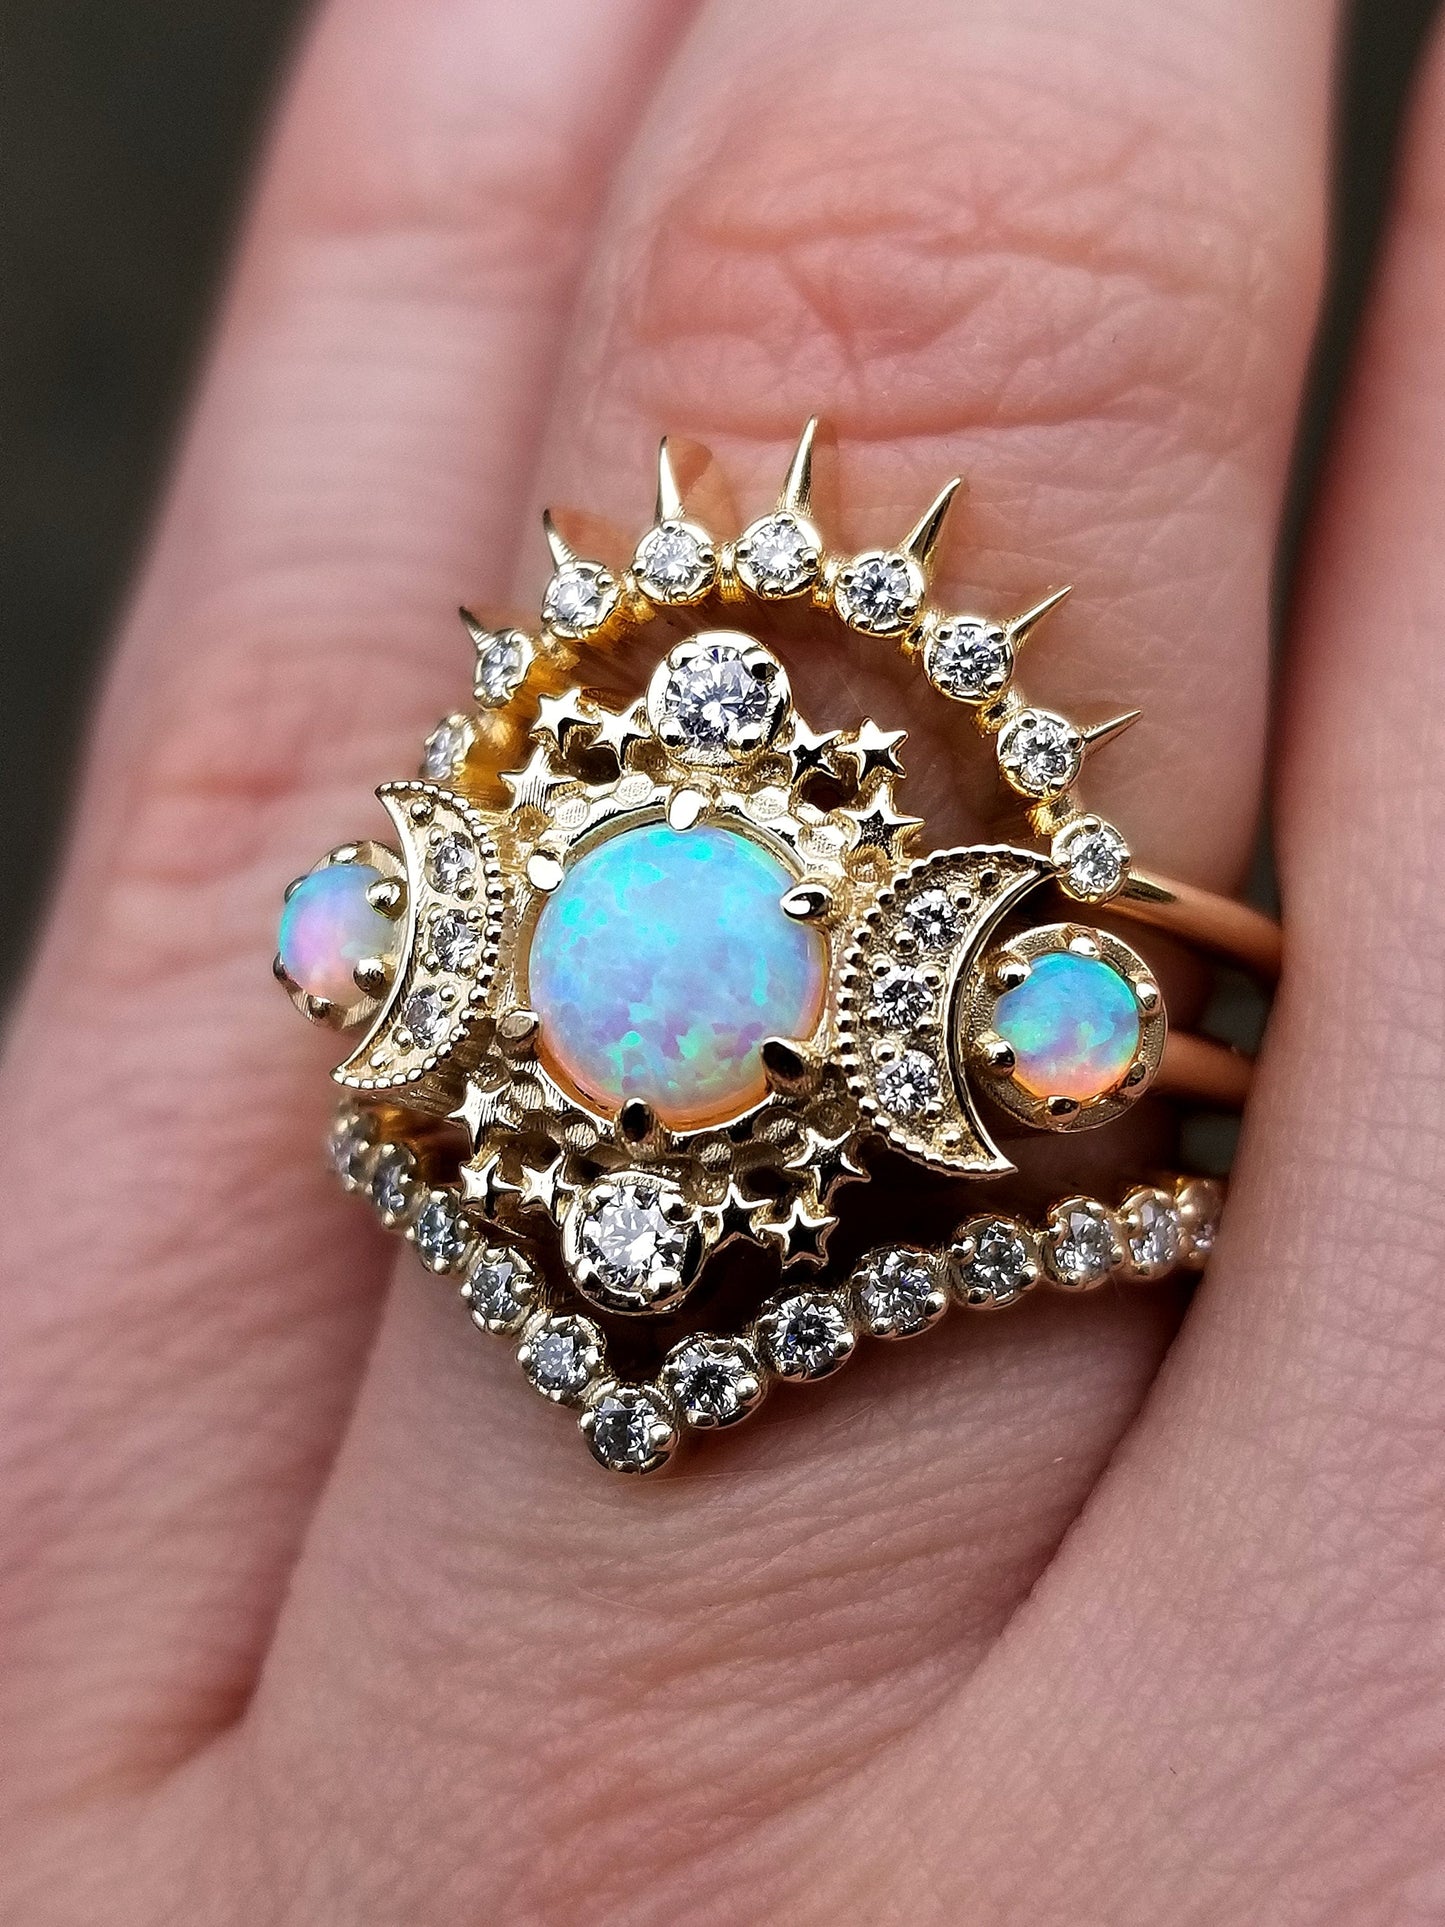 Opal Moon Celestial Engagement 3 Ring Set with Crescent Moons, Stars and Diamonds - Boho Pagan Wedding Set - 14k Yellow Gold